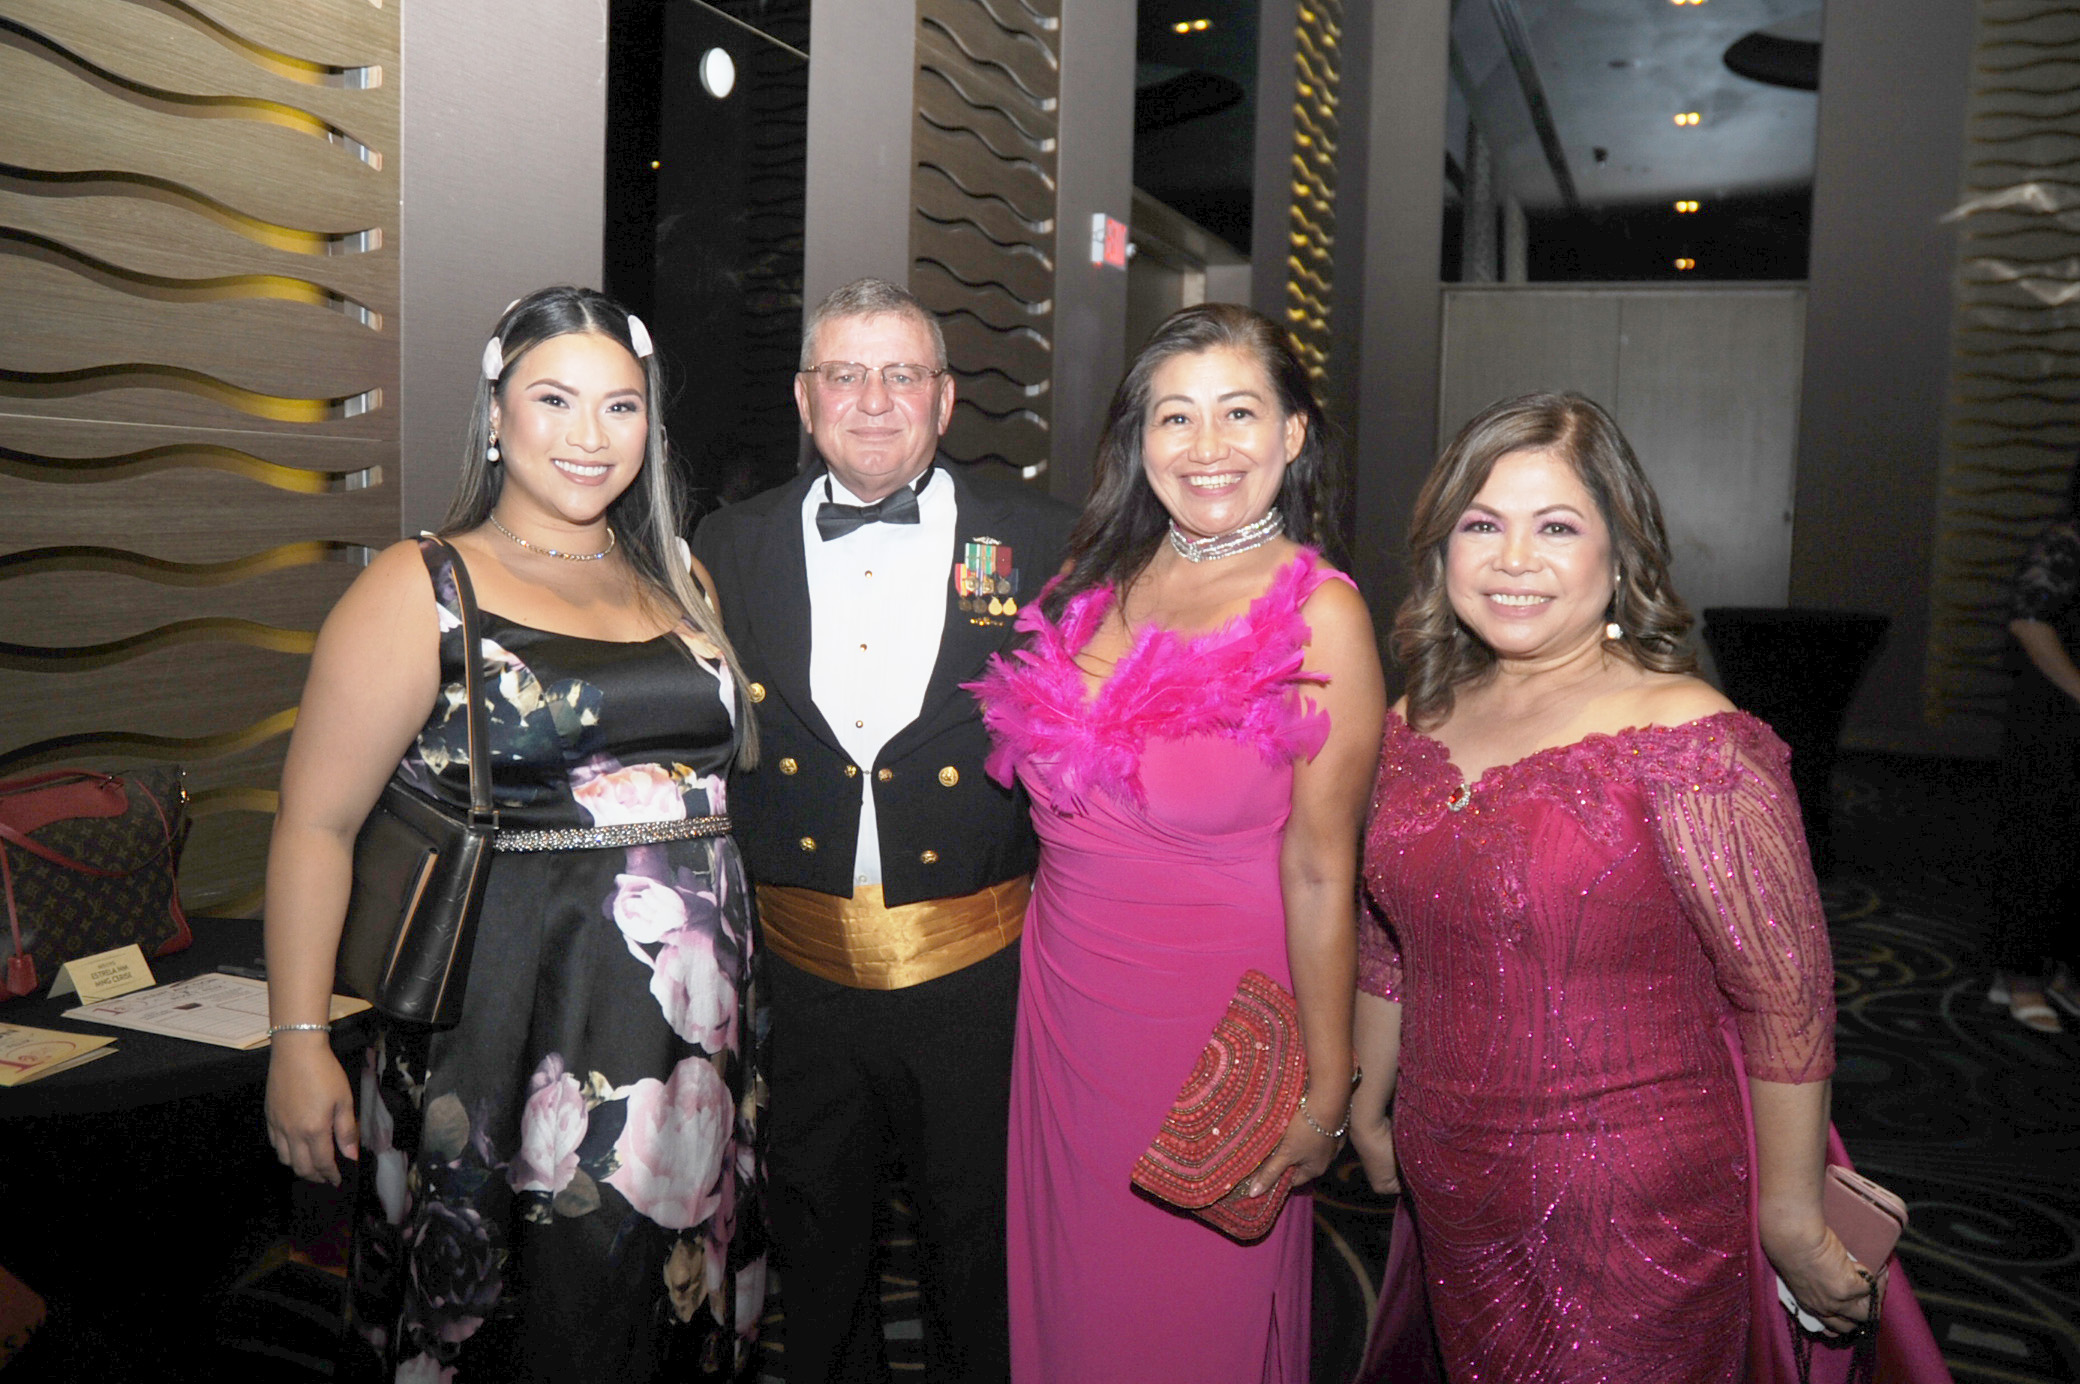 (From left) Dominique Rose Felix Leon Guerrero, associate broker in charge, realtor and property manager, Century 21 Realty Management Co. Inc., board member, Pink Ball Committee; Robert Reilly, port operations manager, DZSP 21 LLC; Gina Reilly, wife of Robert; and Leah Beth Naholowaa, director, Starbase Guam and chairwoman, Pink Ball Committee.